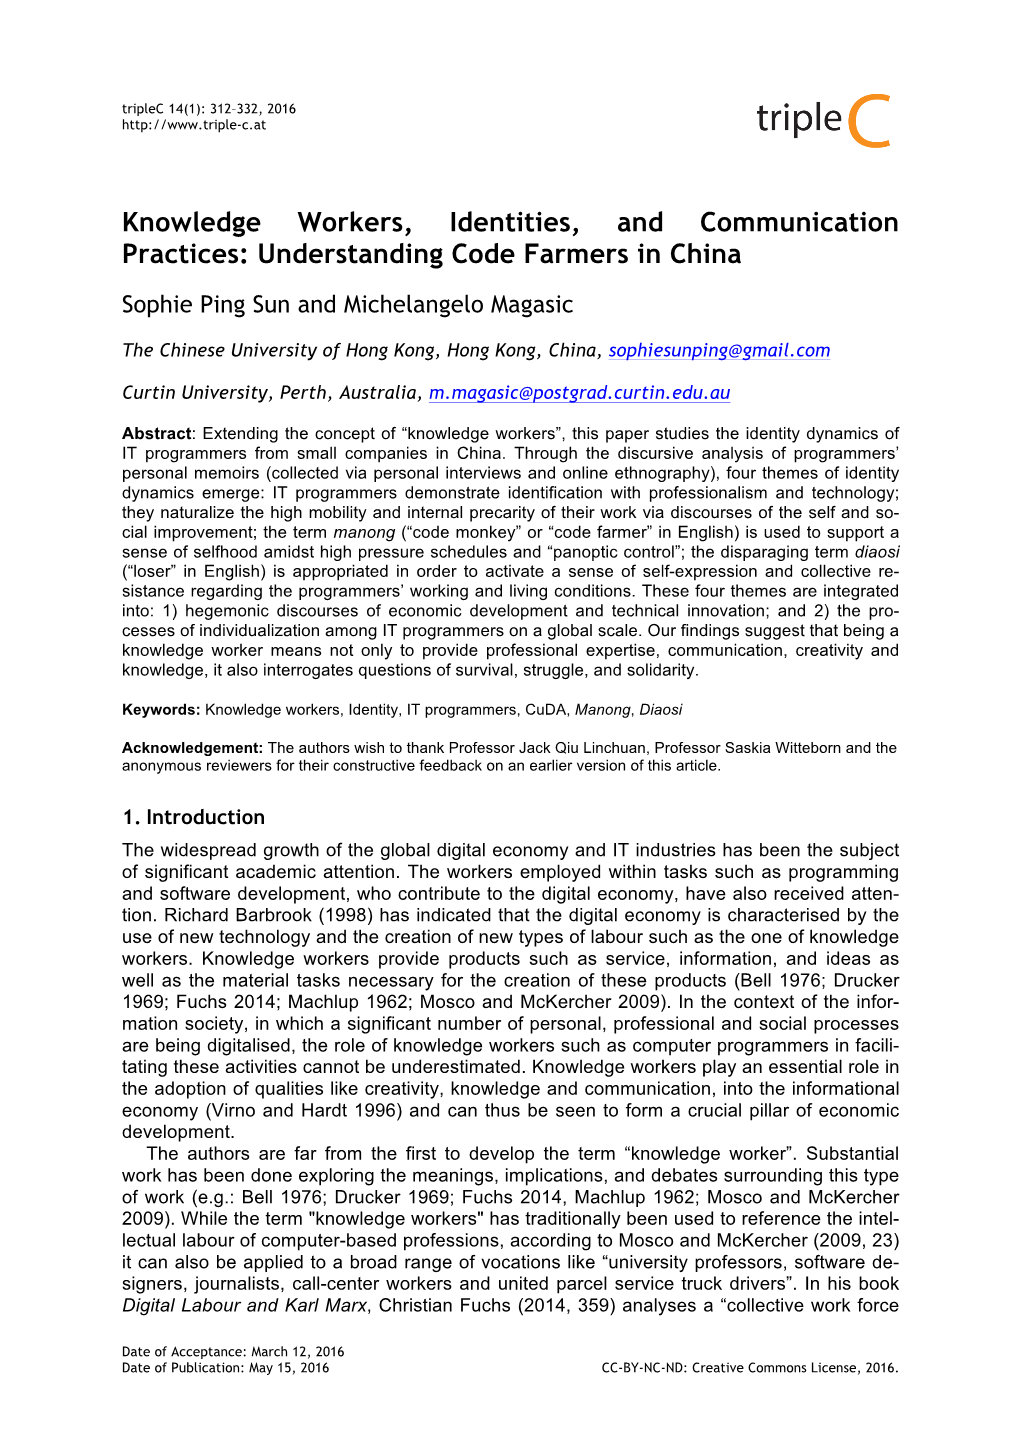 Knowledge Workers, Identities, and Communication Practices: Understanding Code Farmers in China